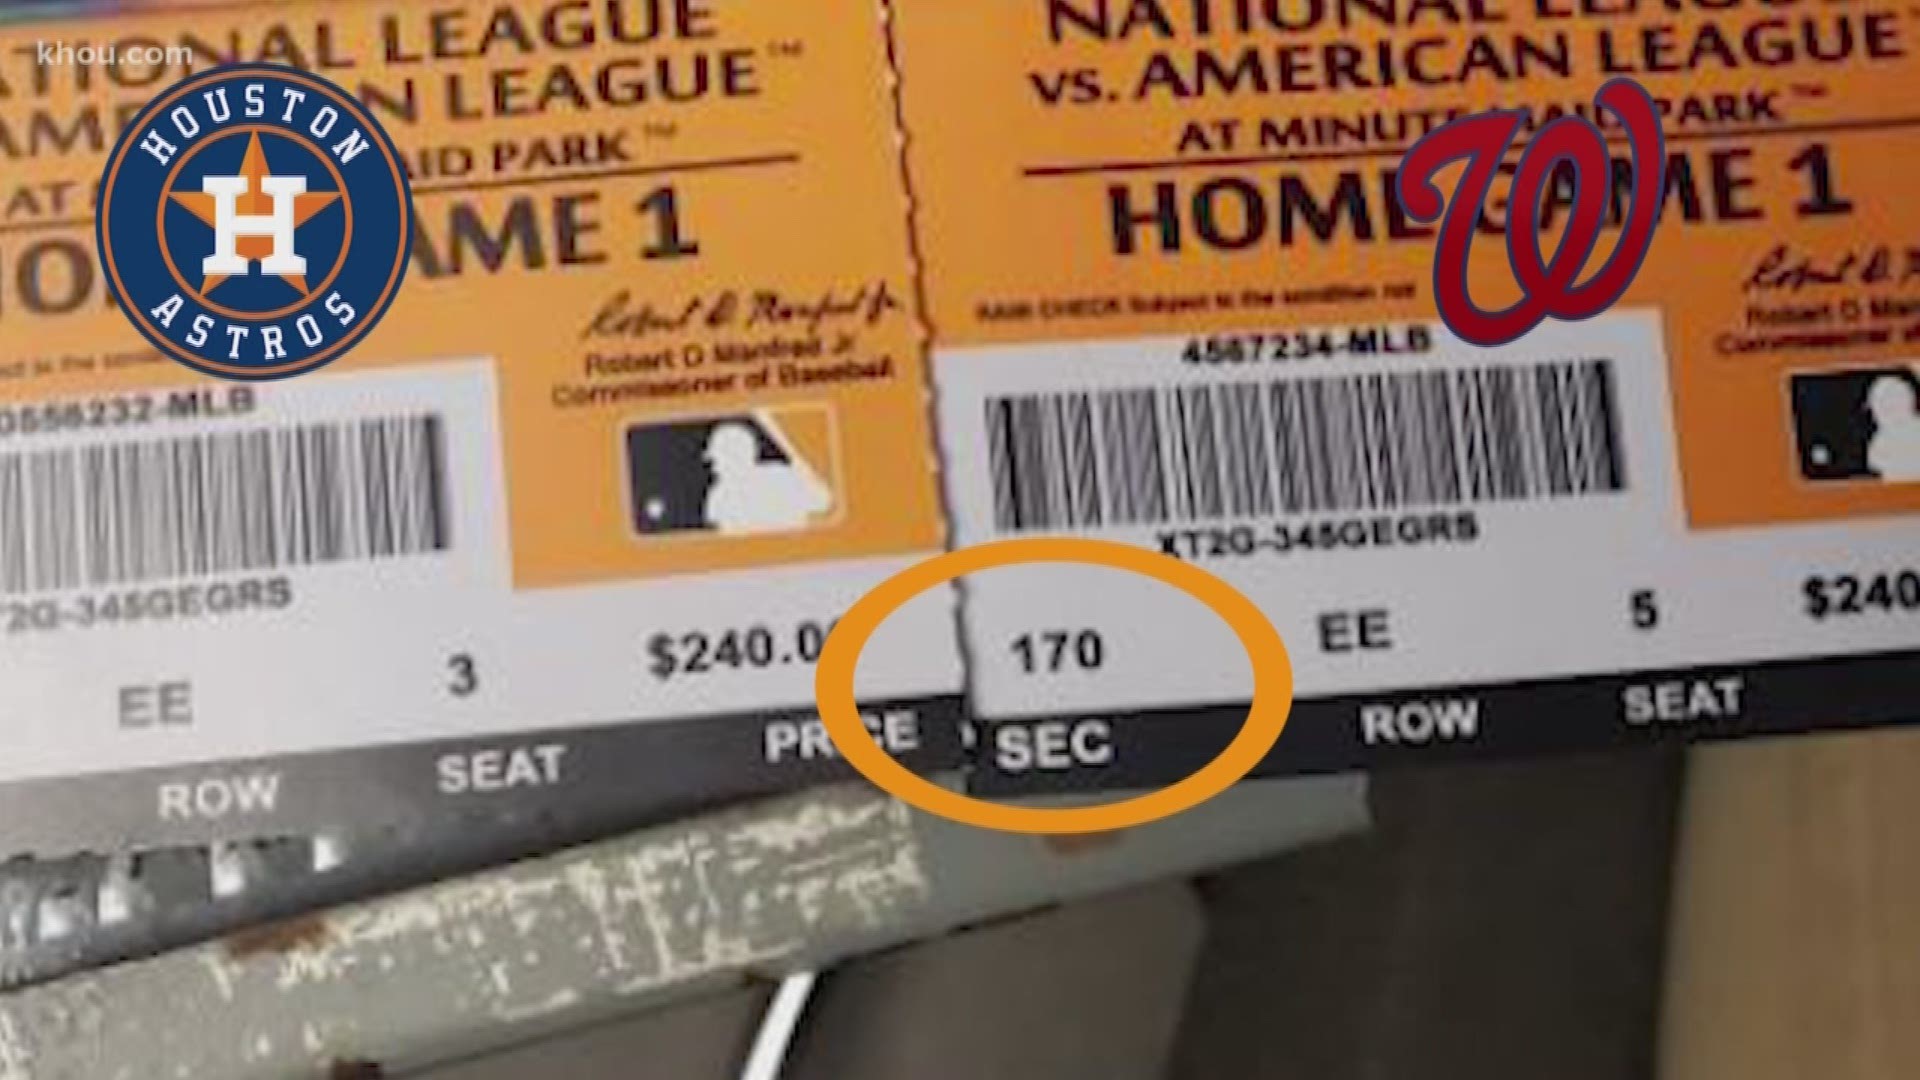 As the World Series comes to an end, many are trying to get their hands on some game tickets. But be careful. Not all tickets will get you into the game.